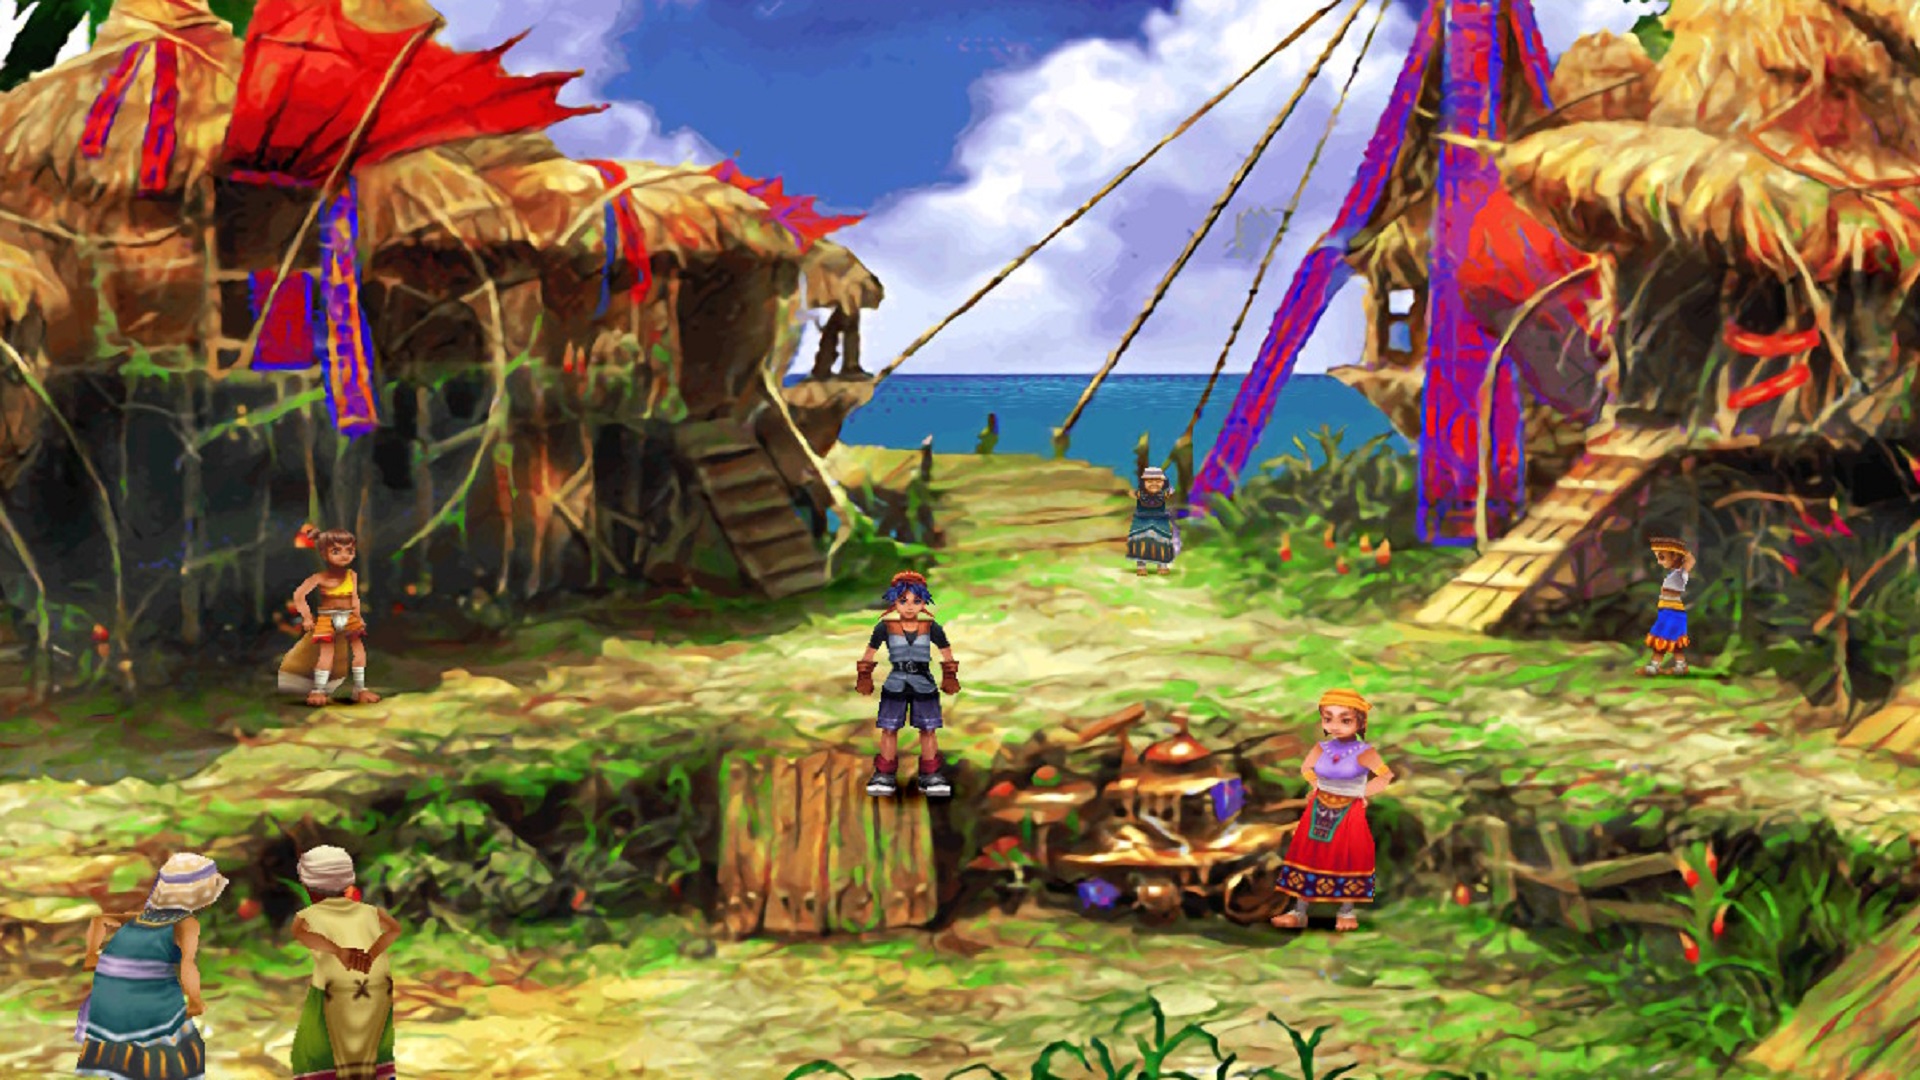 Chrono Cross Remaster Revealed With a Release Date - IGN